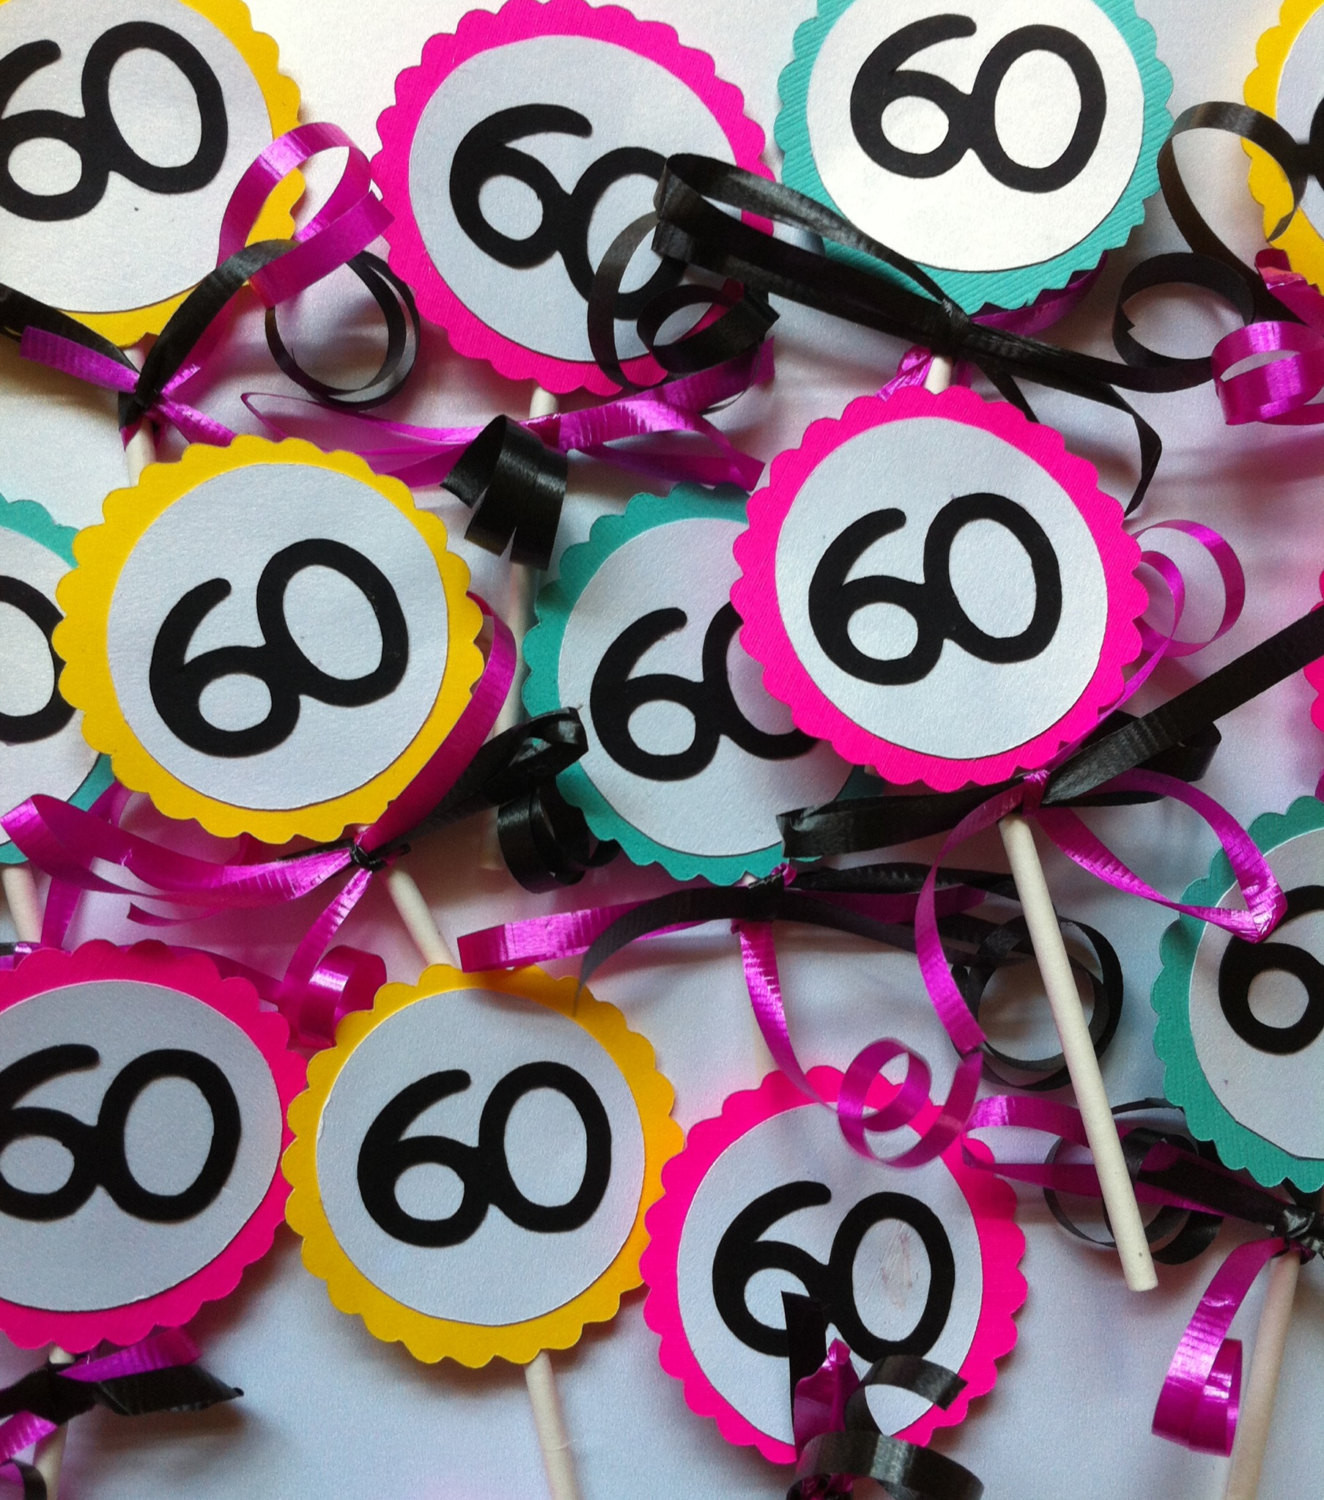 60 Birthday Party Decorations
 60th Birthday Decorations Cupcake Toppers